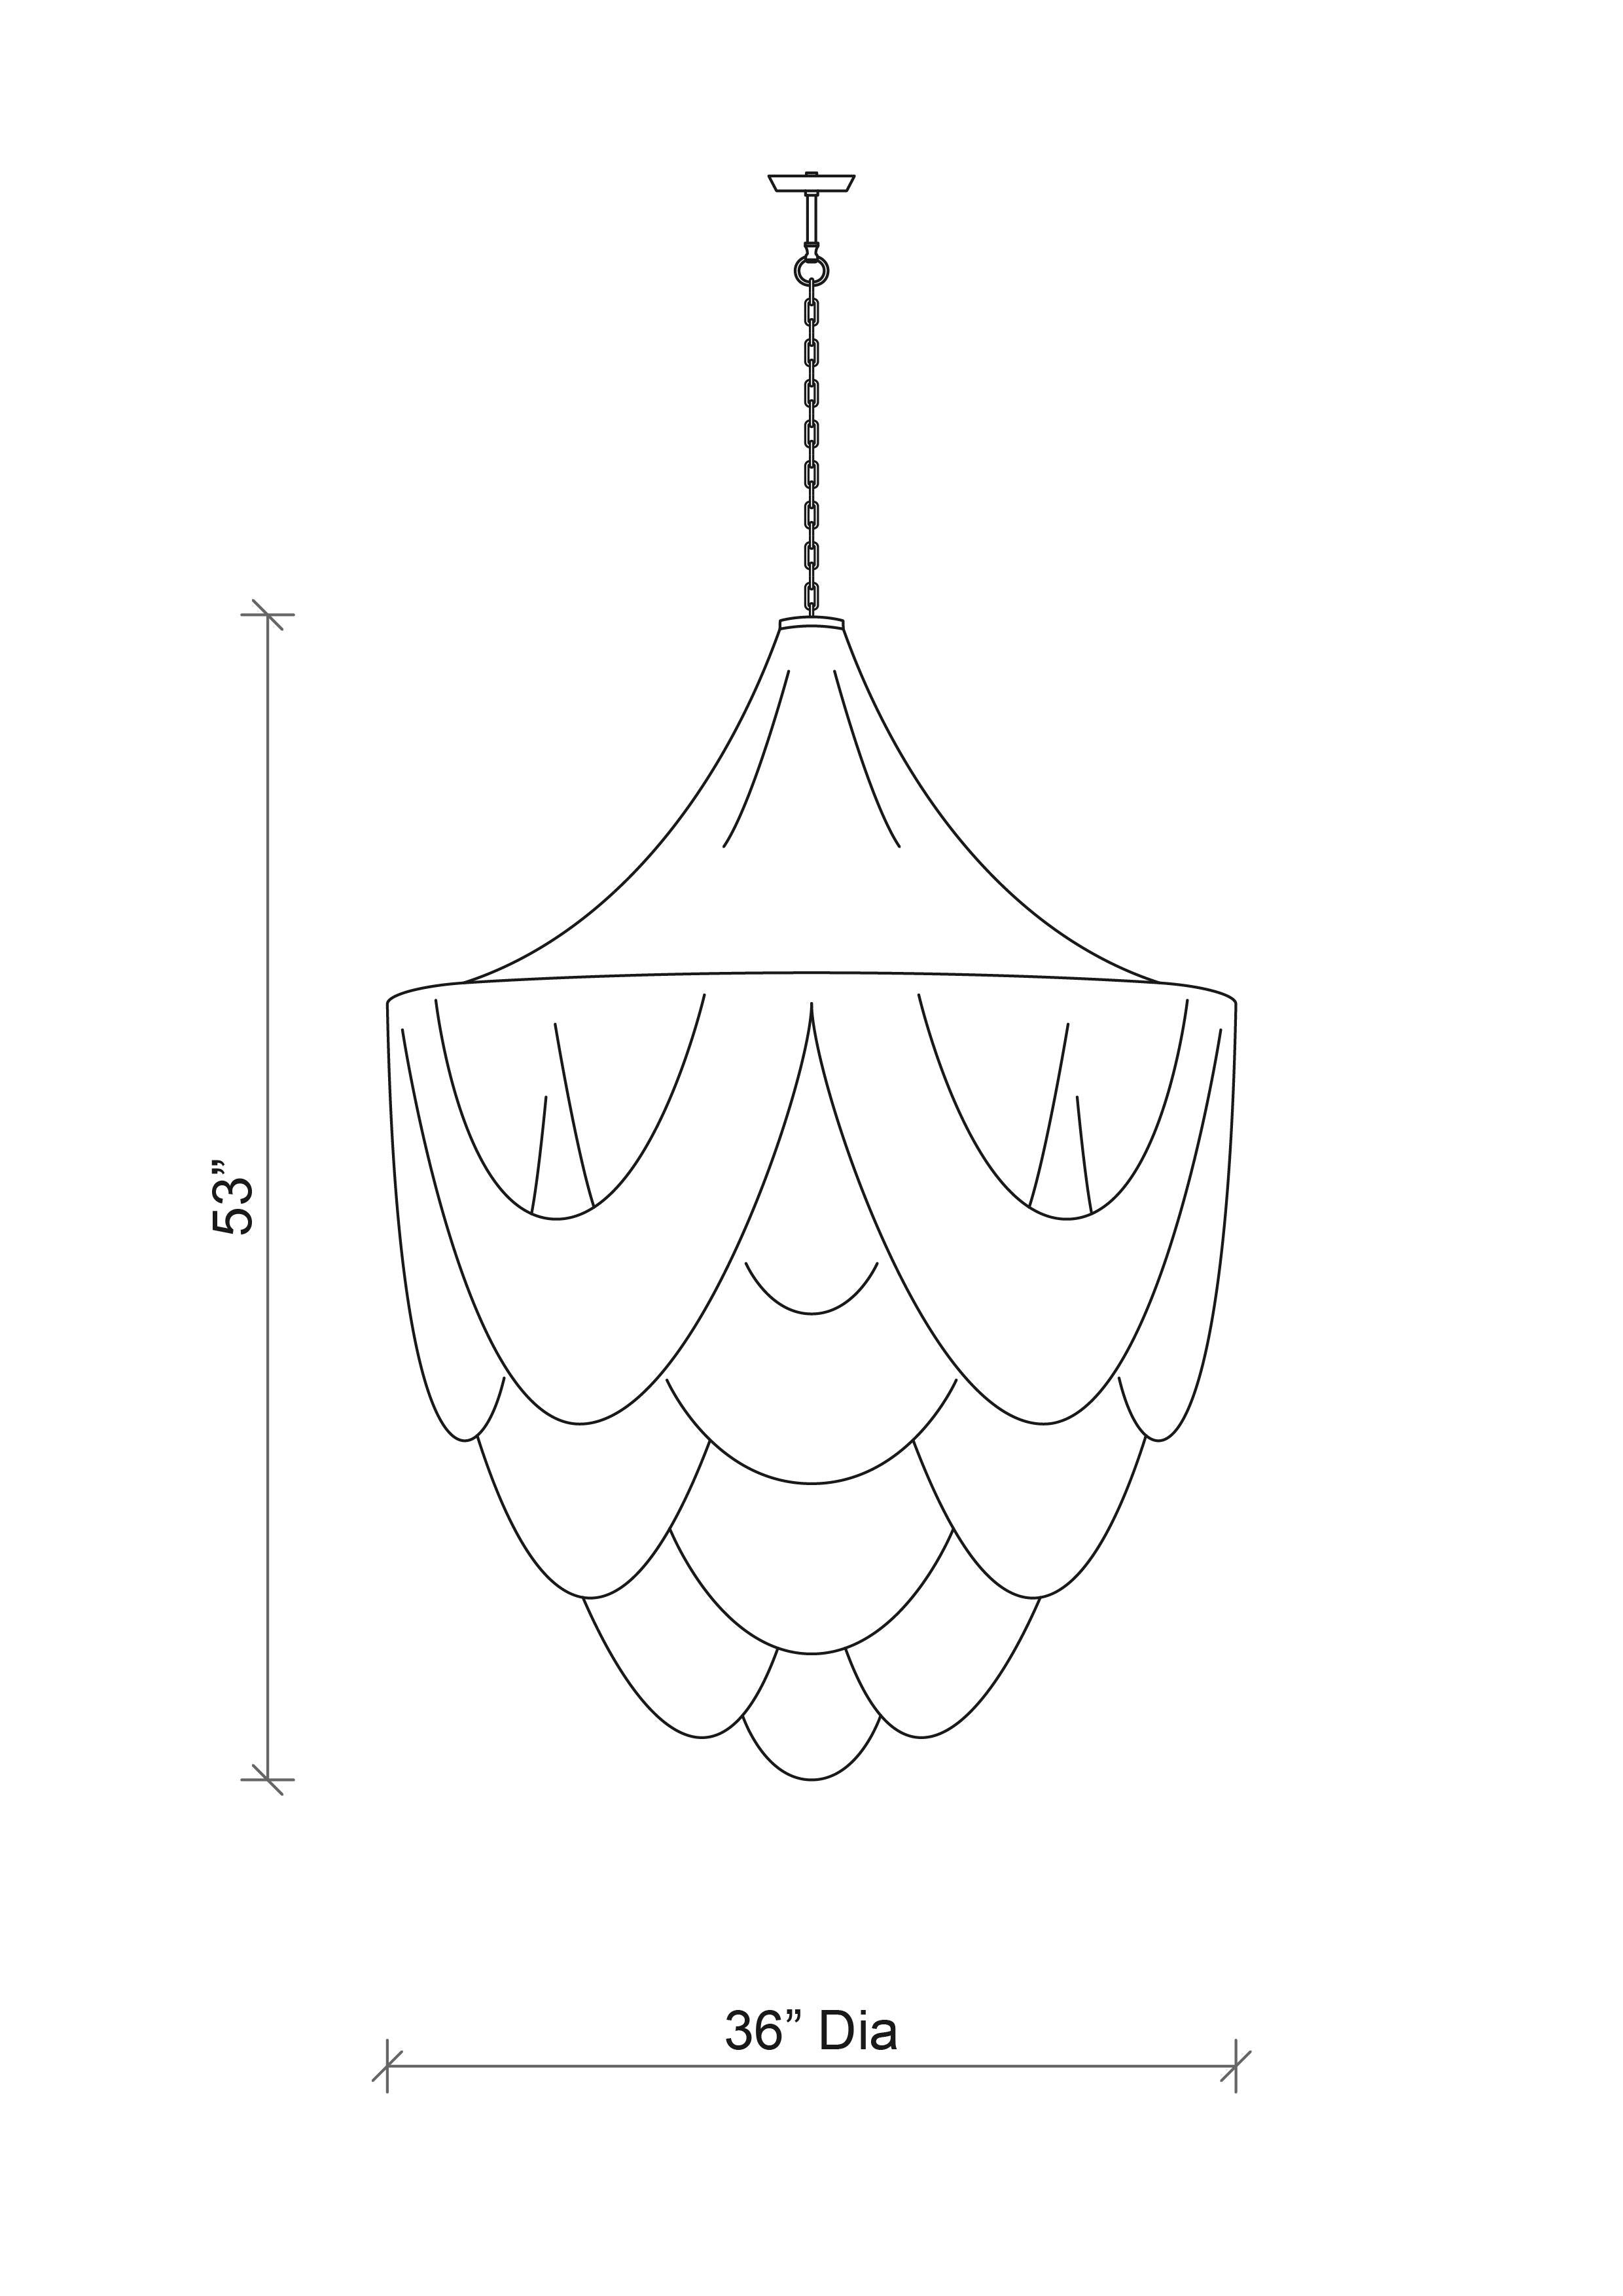 Extra Large Round Whisper with Crown Leather Chandelier in NeKeia Leather